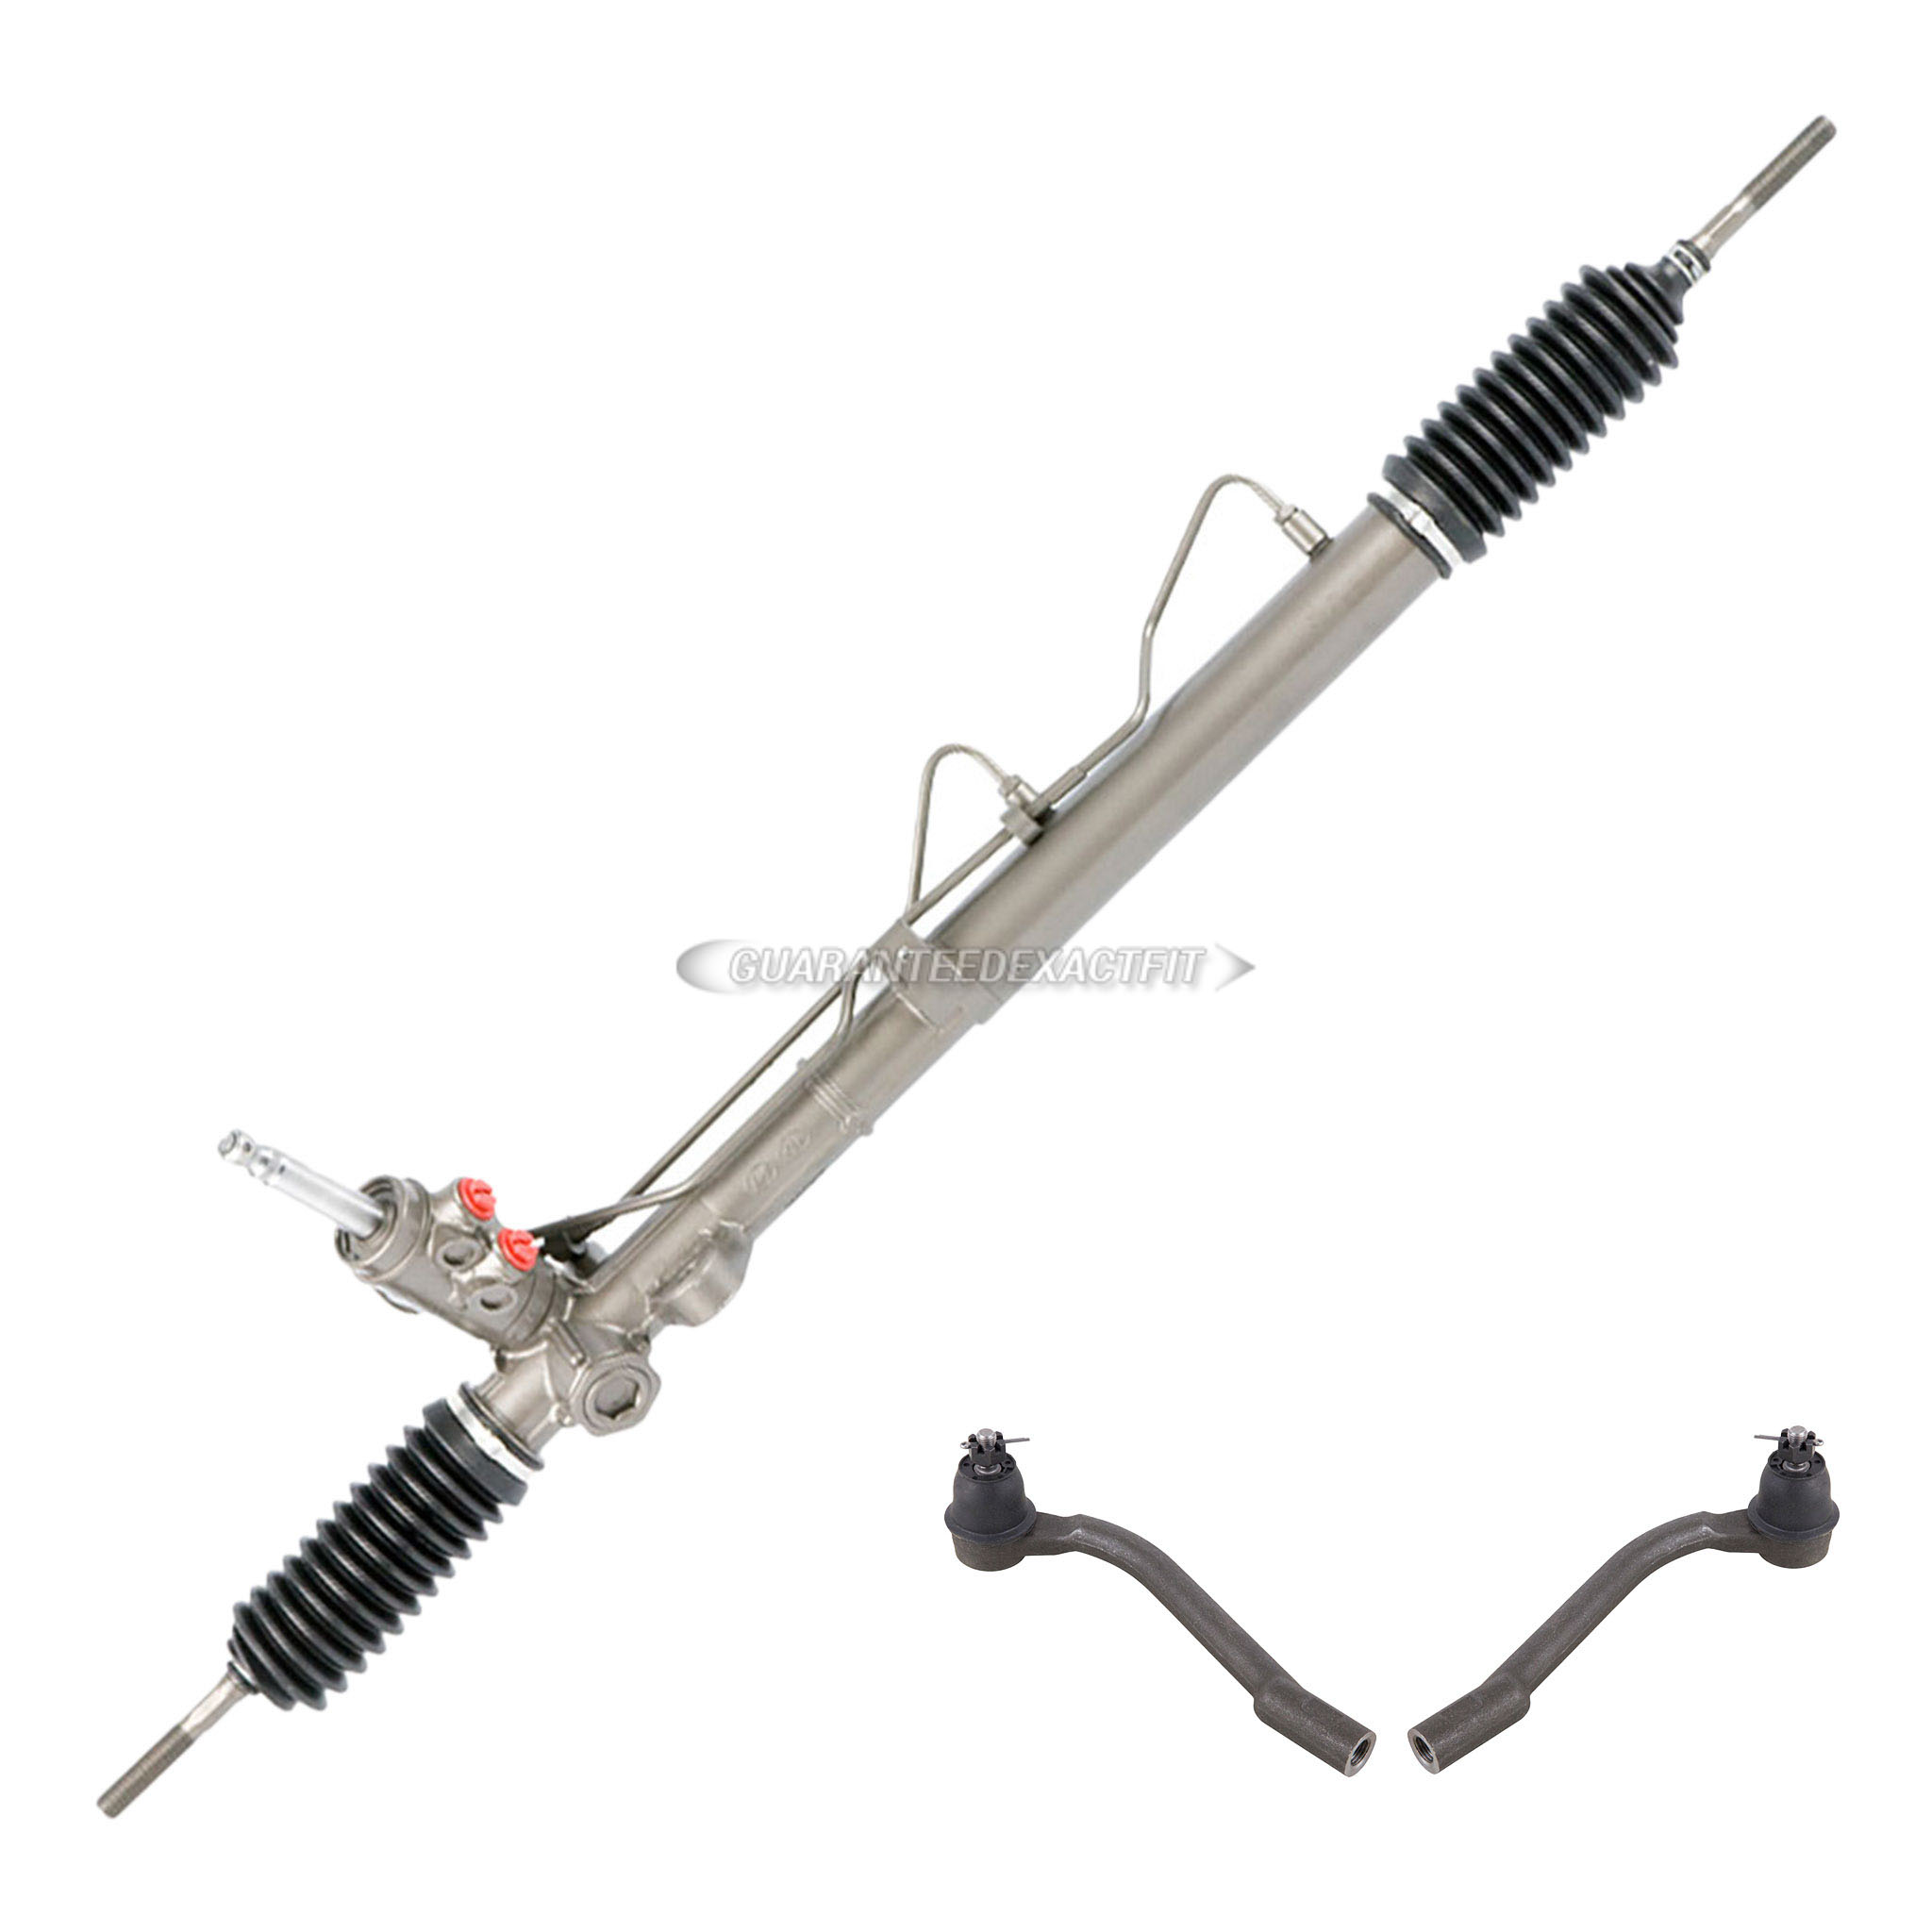  Kia forte koup rack and pinion and outer tie rod kit 